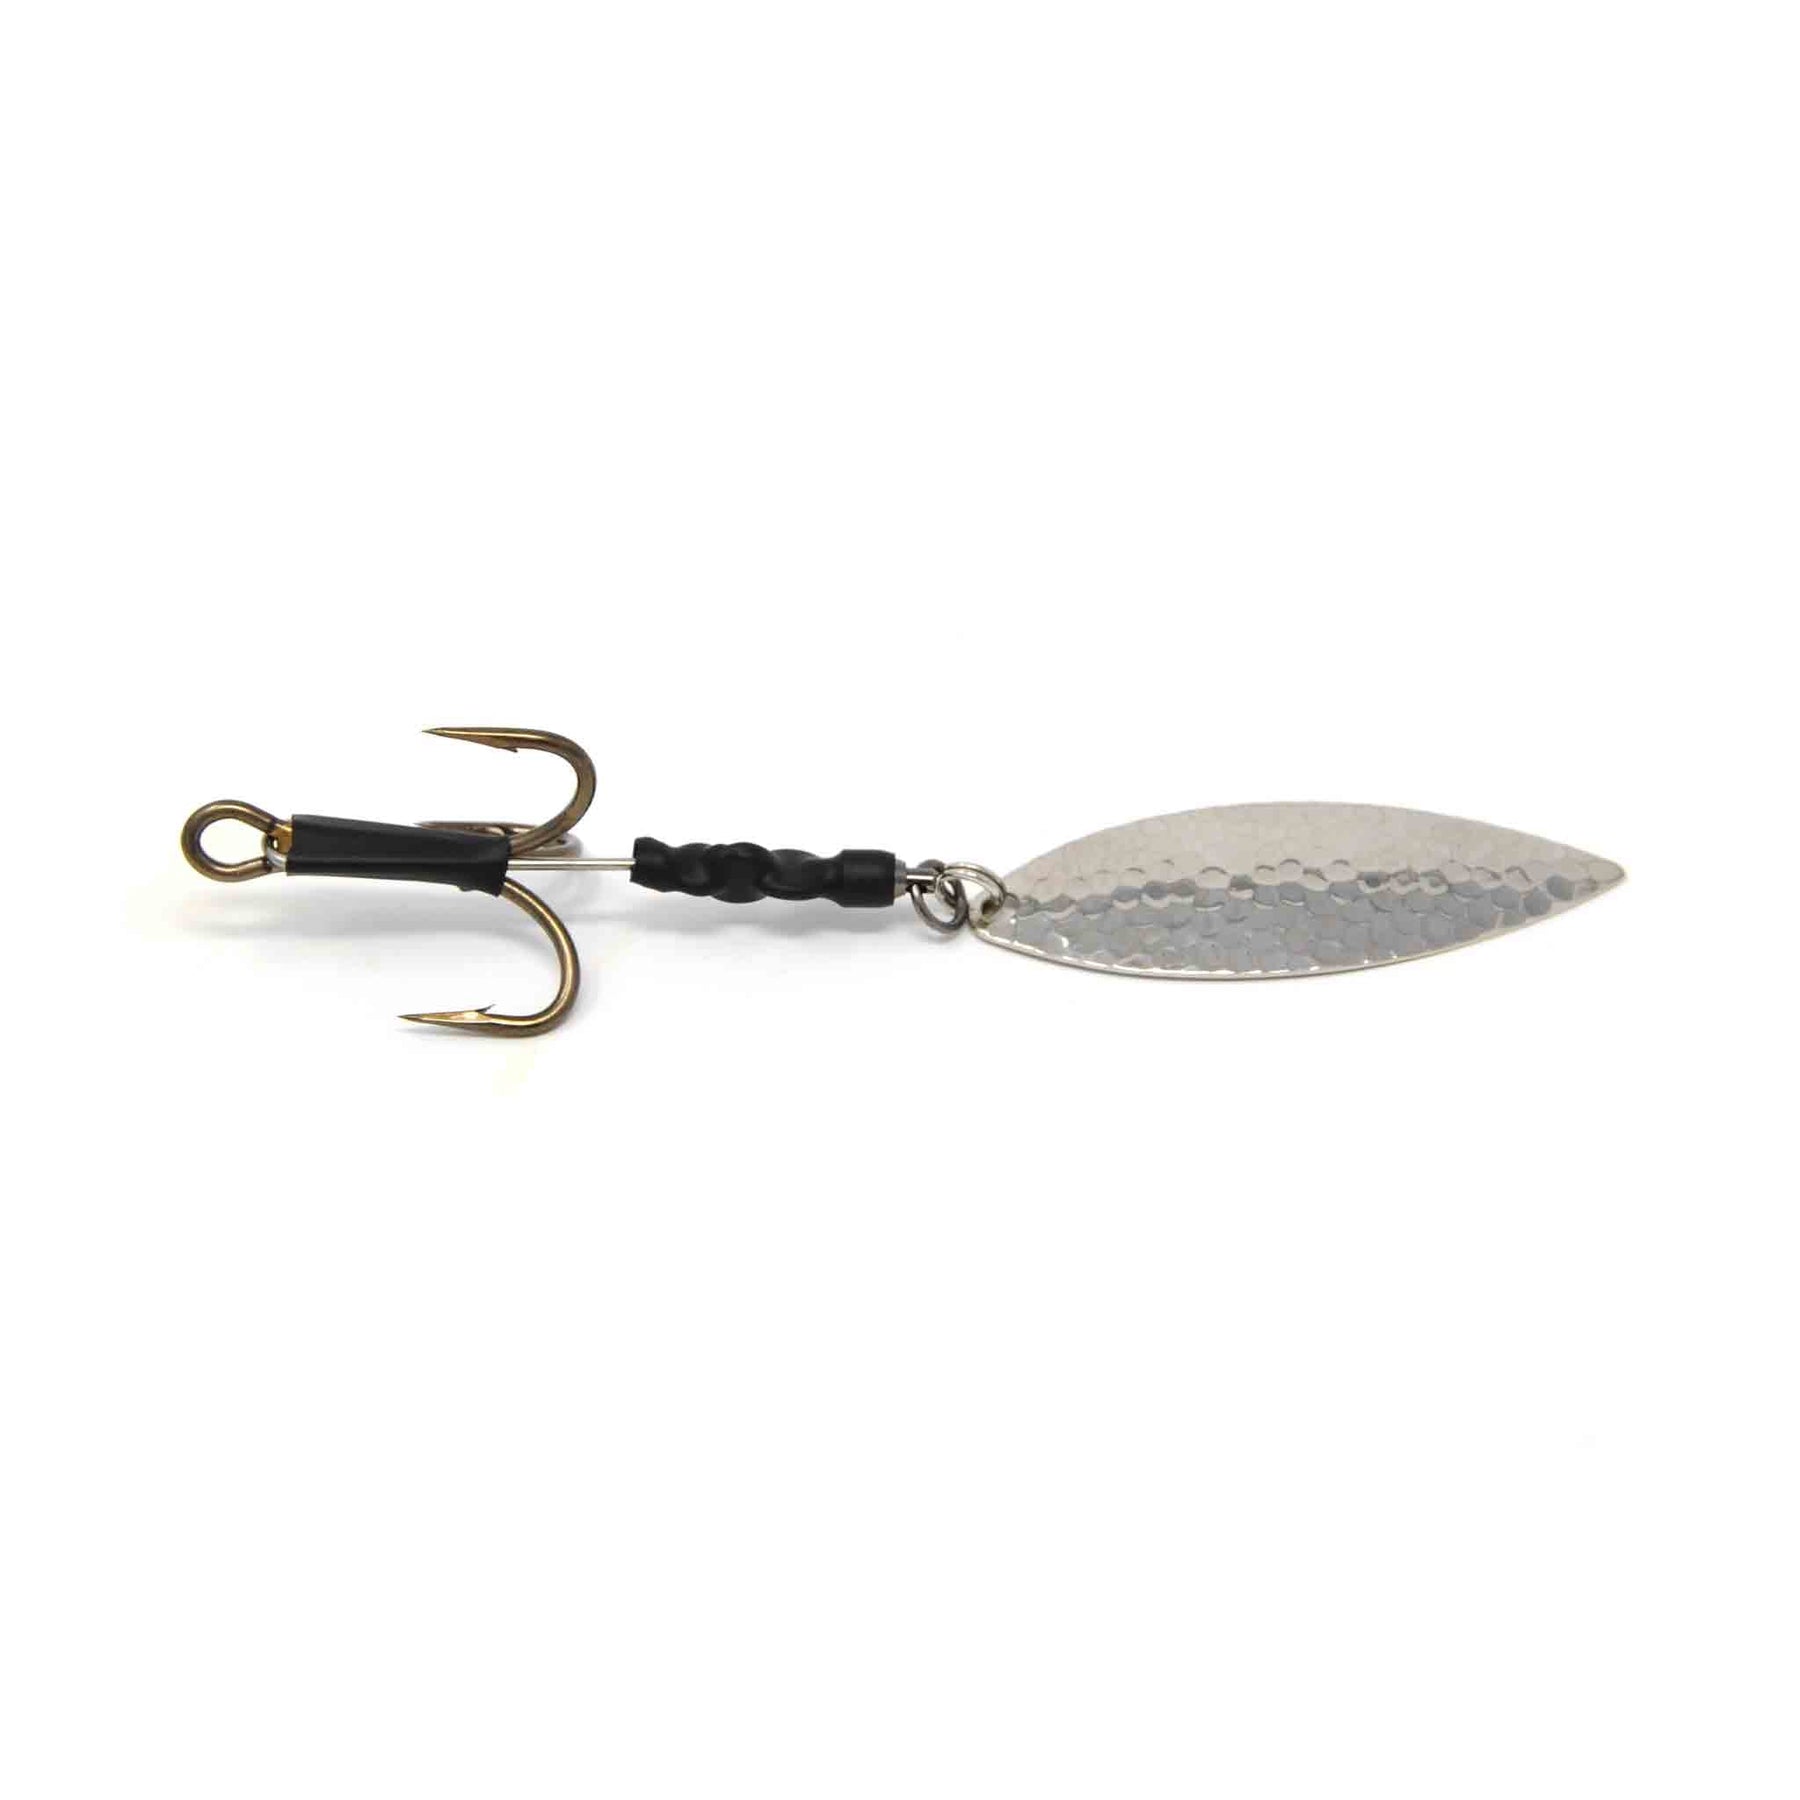 Beaver's Baits Mini Beaver Replacement Tail - Musky Tackle Online